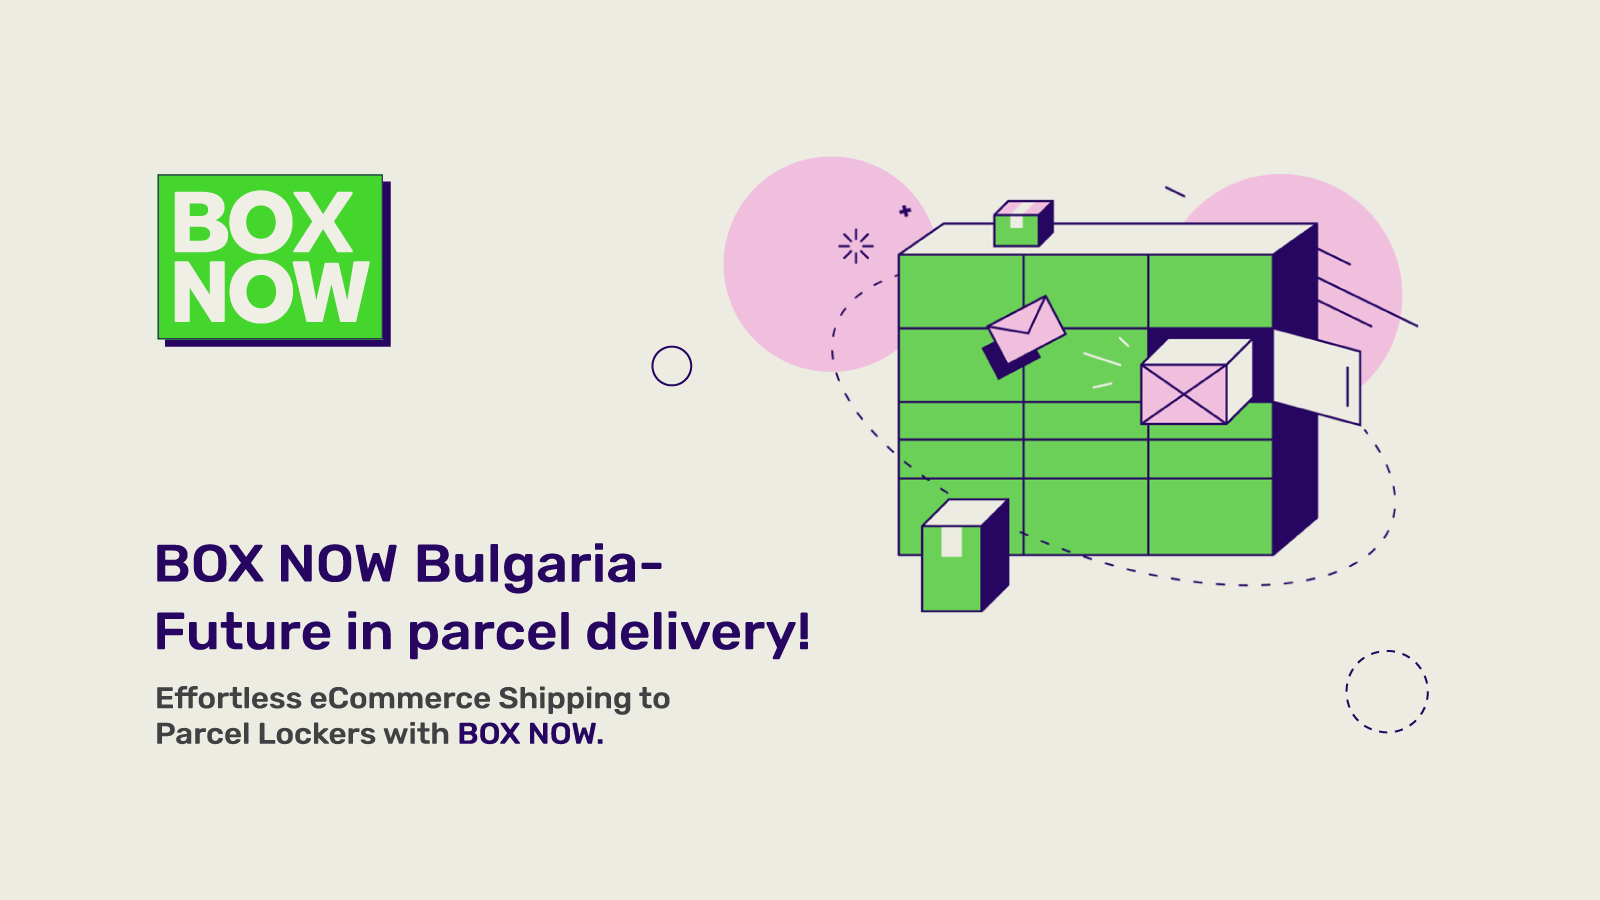 BOX NOW Bulgaria - Future in parcel delivery!